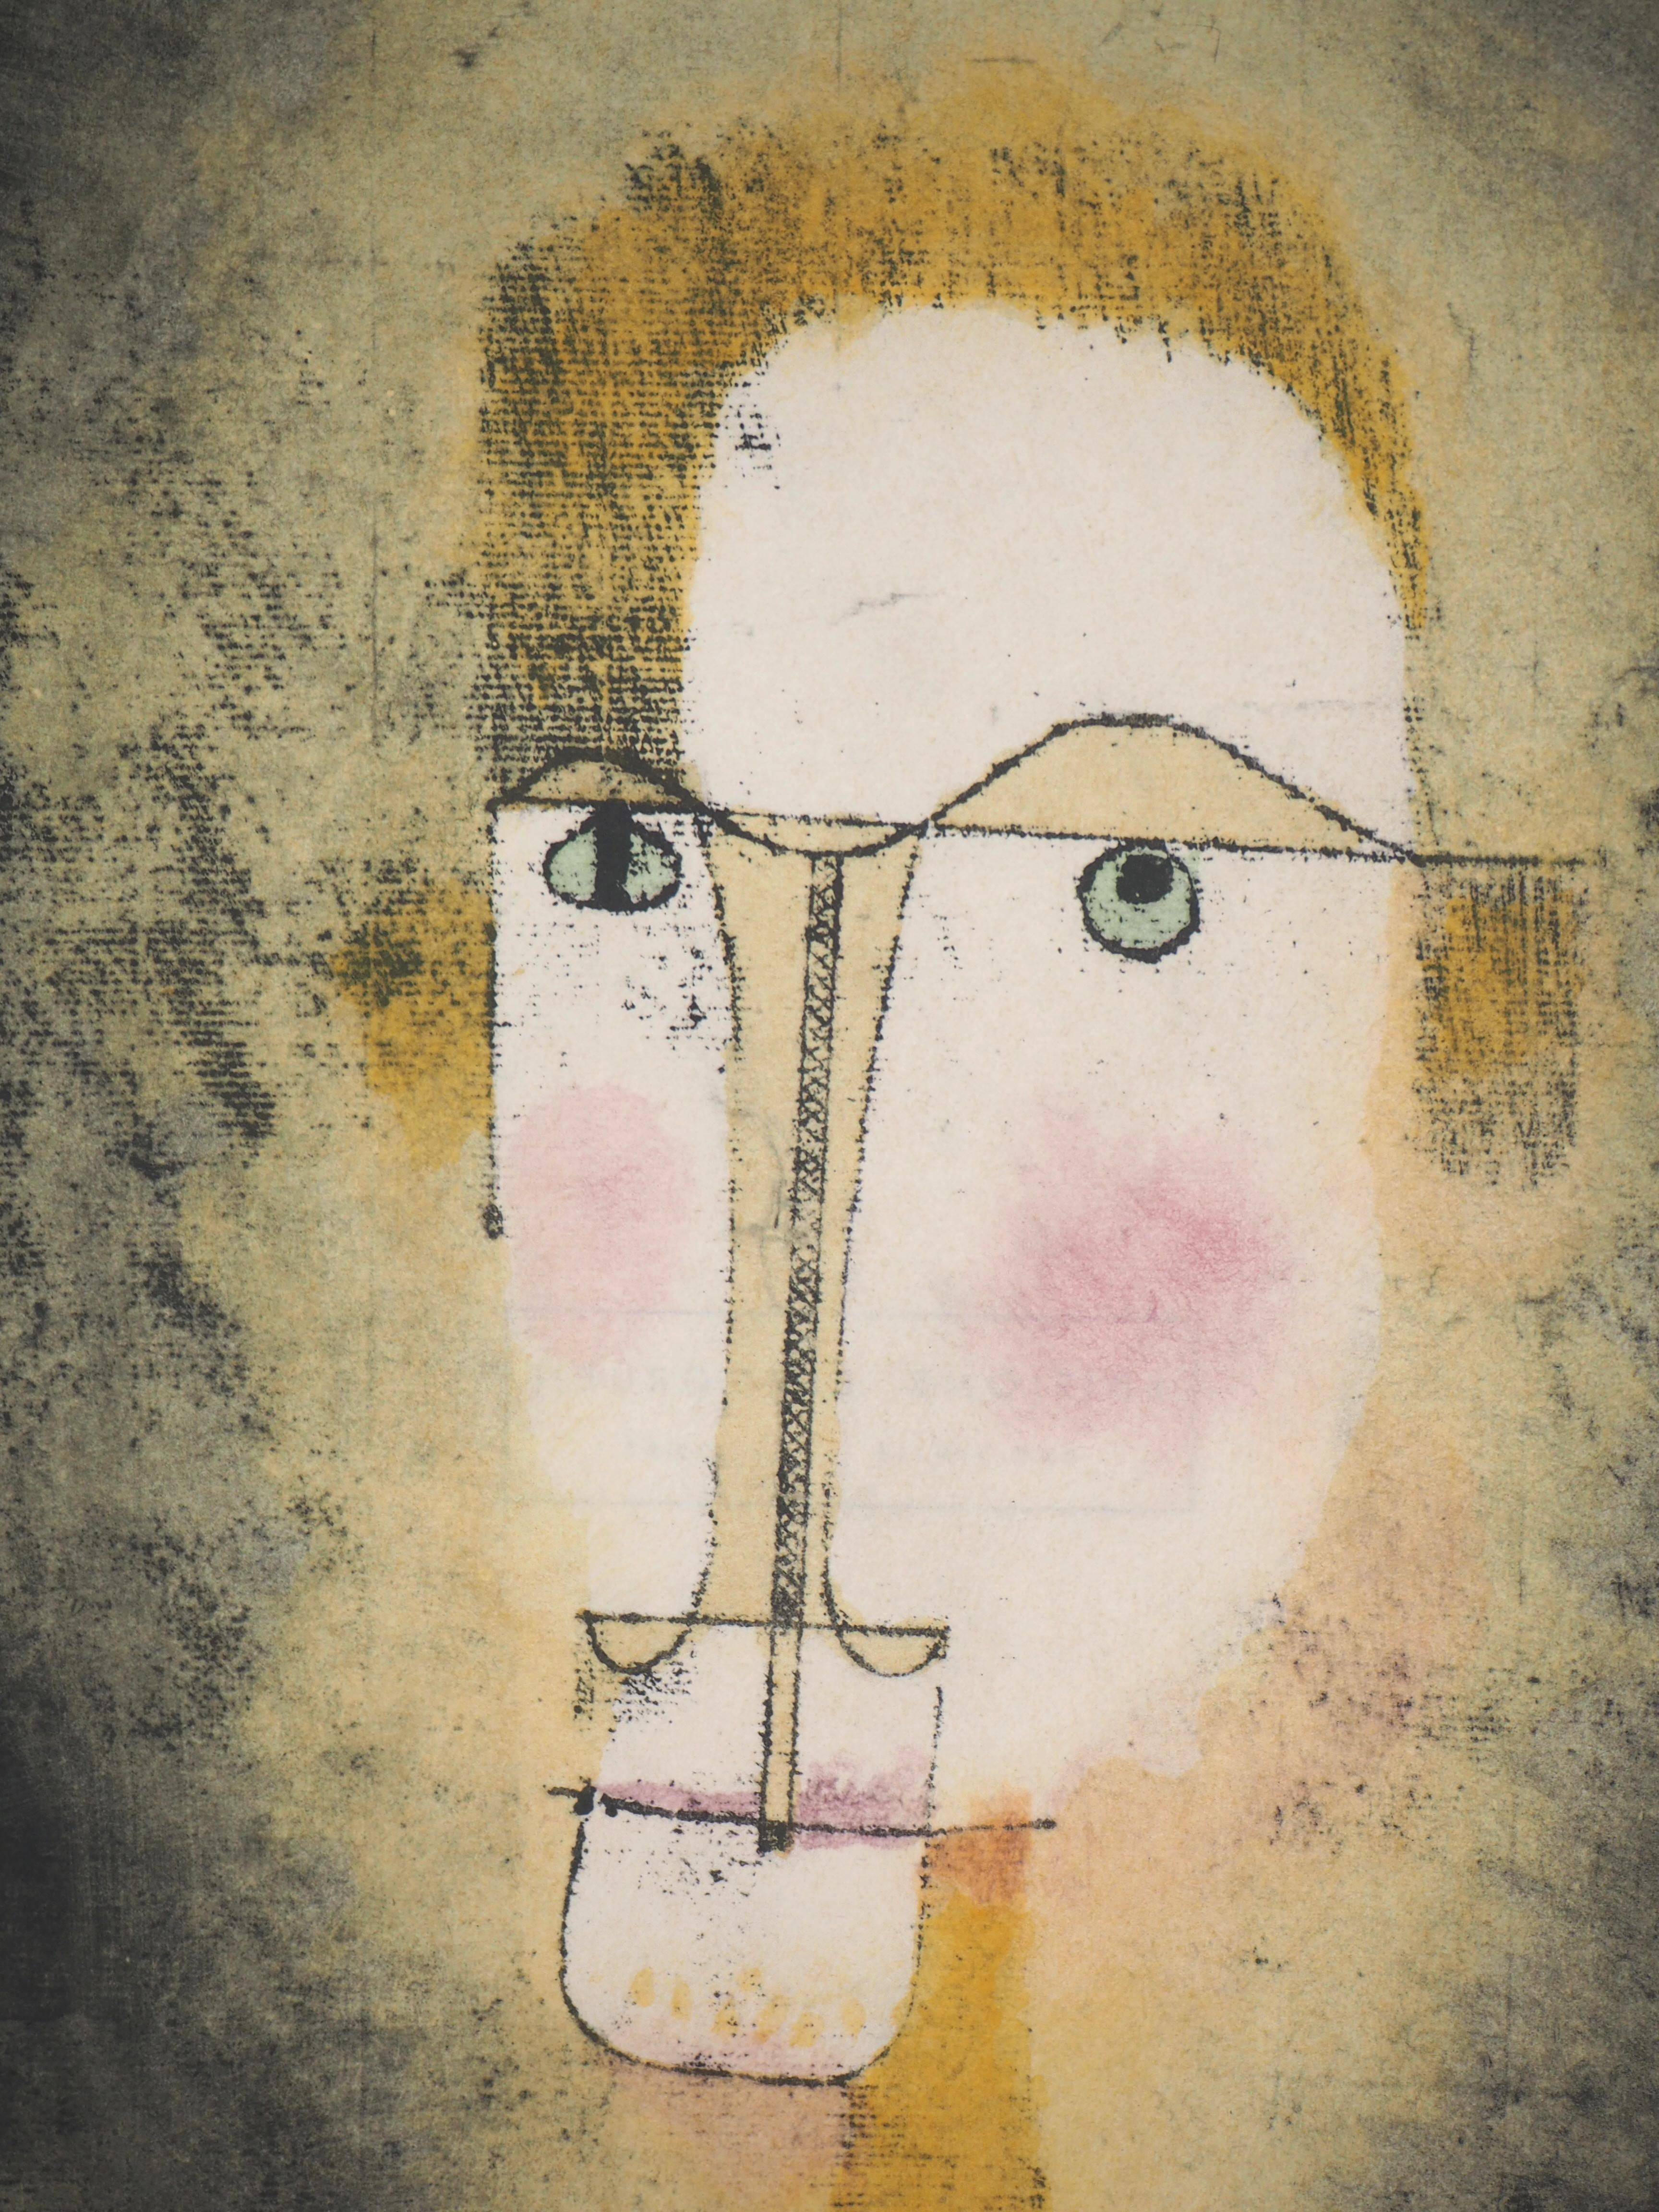 Portrait in Yellow - Lithograph and Stencil - Surrealist Print by (after) Paul Klee